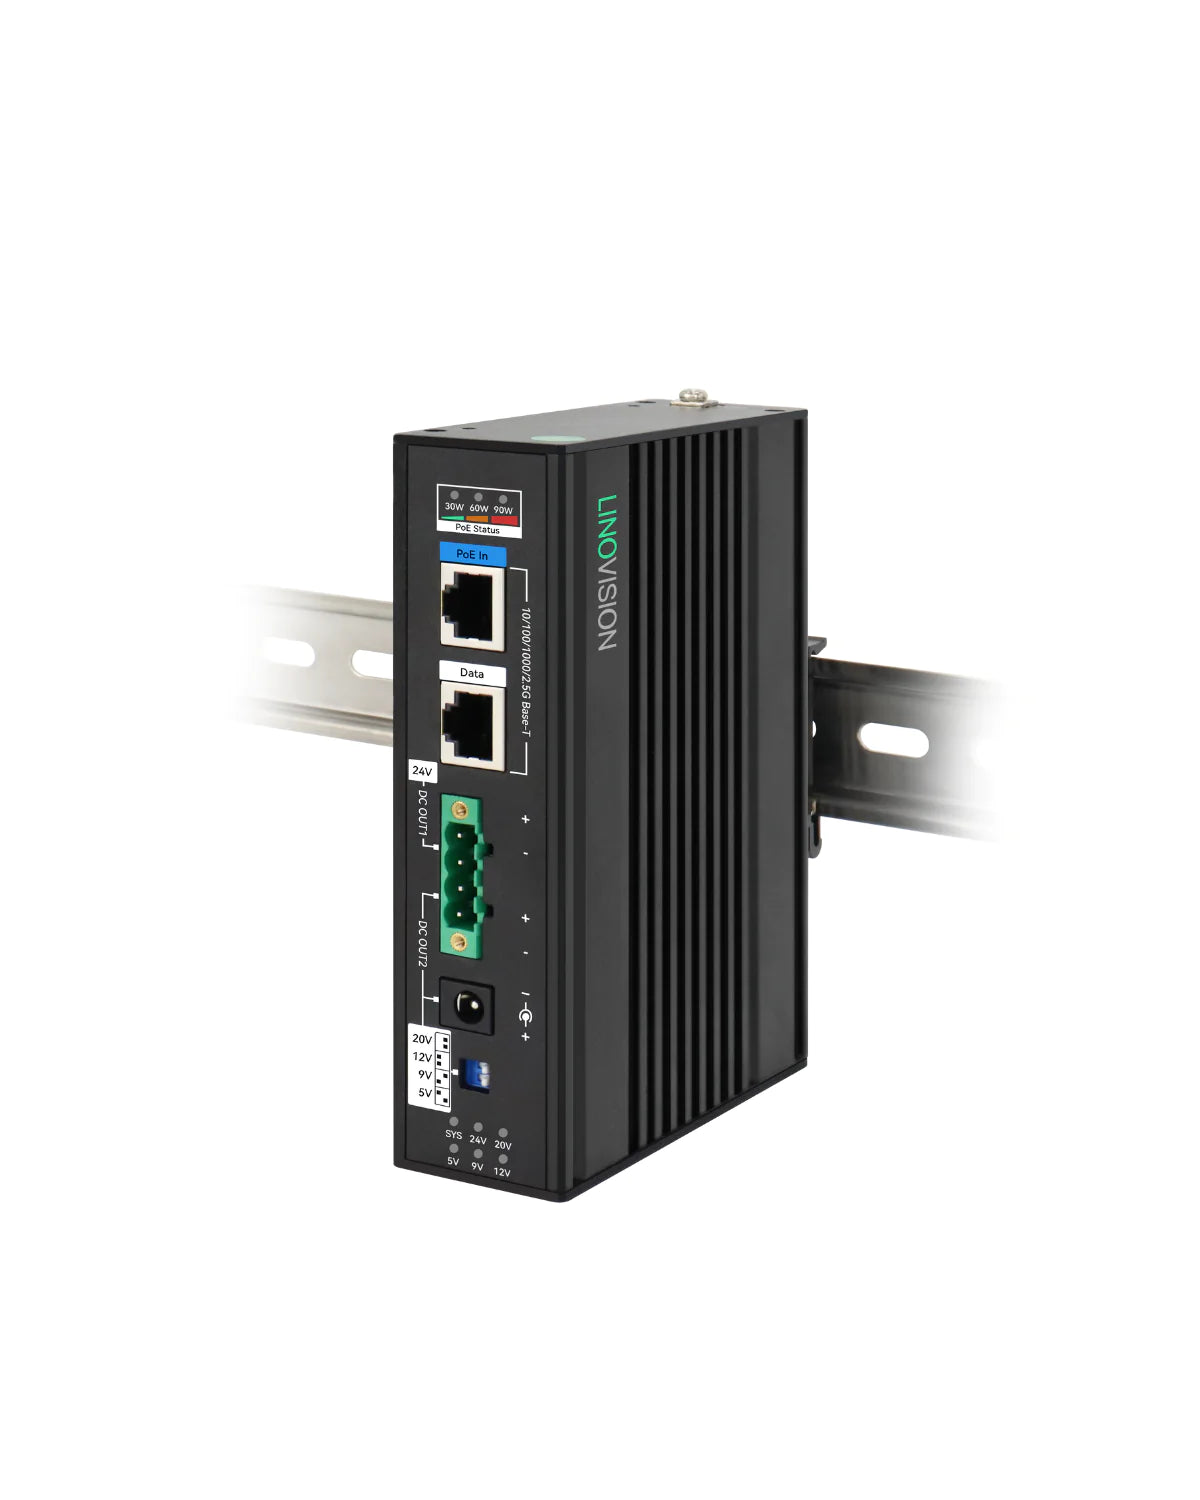 ICRealtime IVB-EOC-202 Single-Port Long Range Ethernet over Coax Extender  (Sold In Pairs)